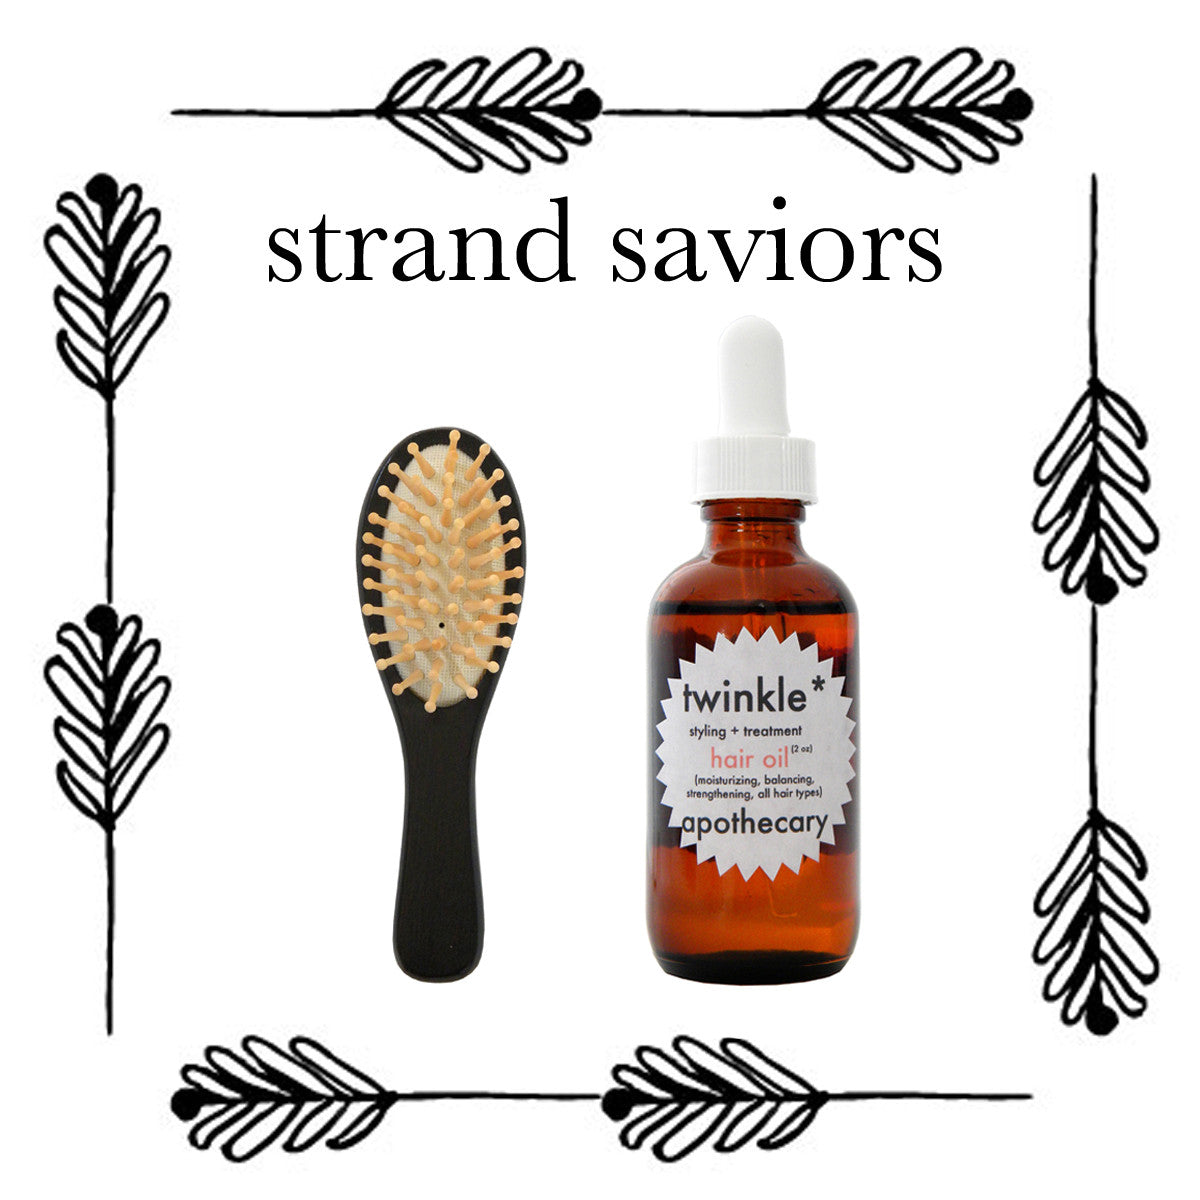 Free Brush with Hair Oil Purchase!